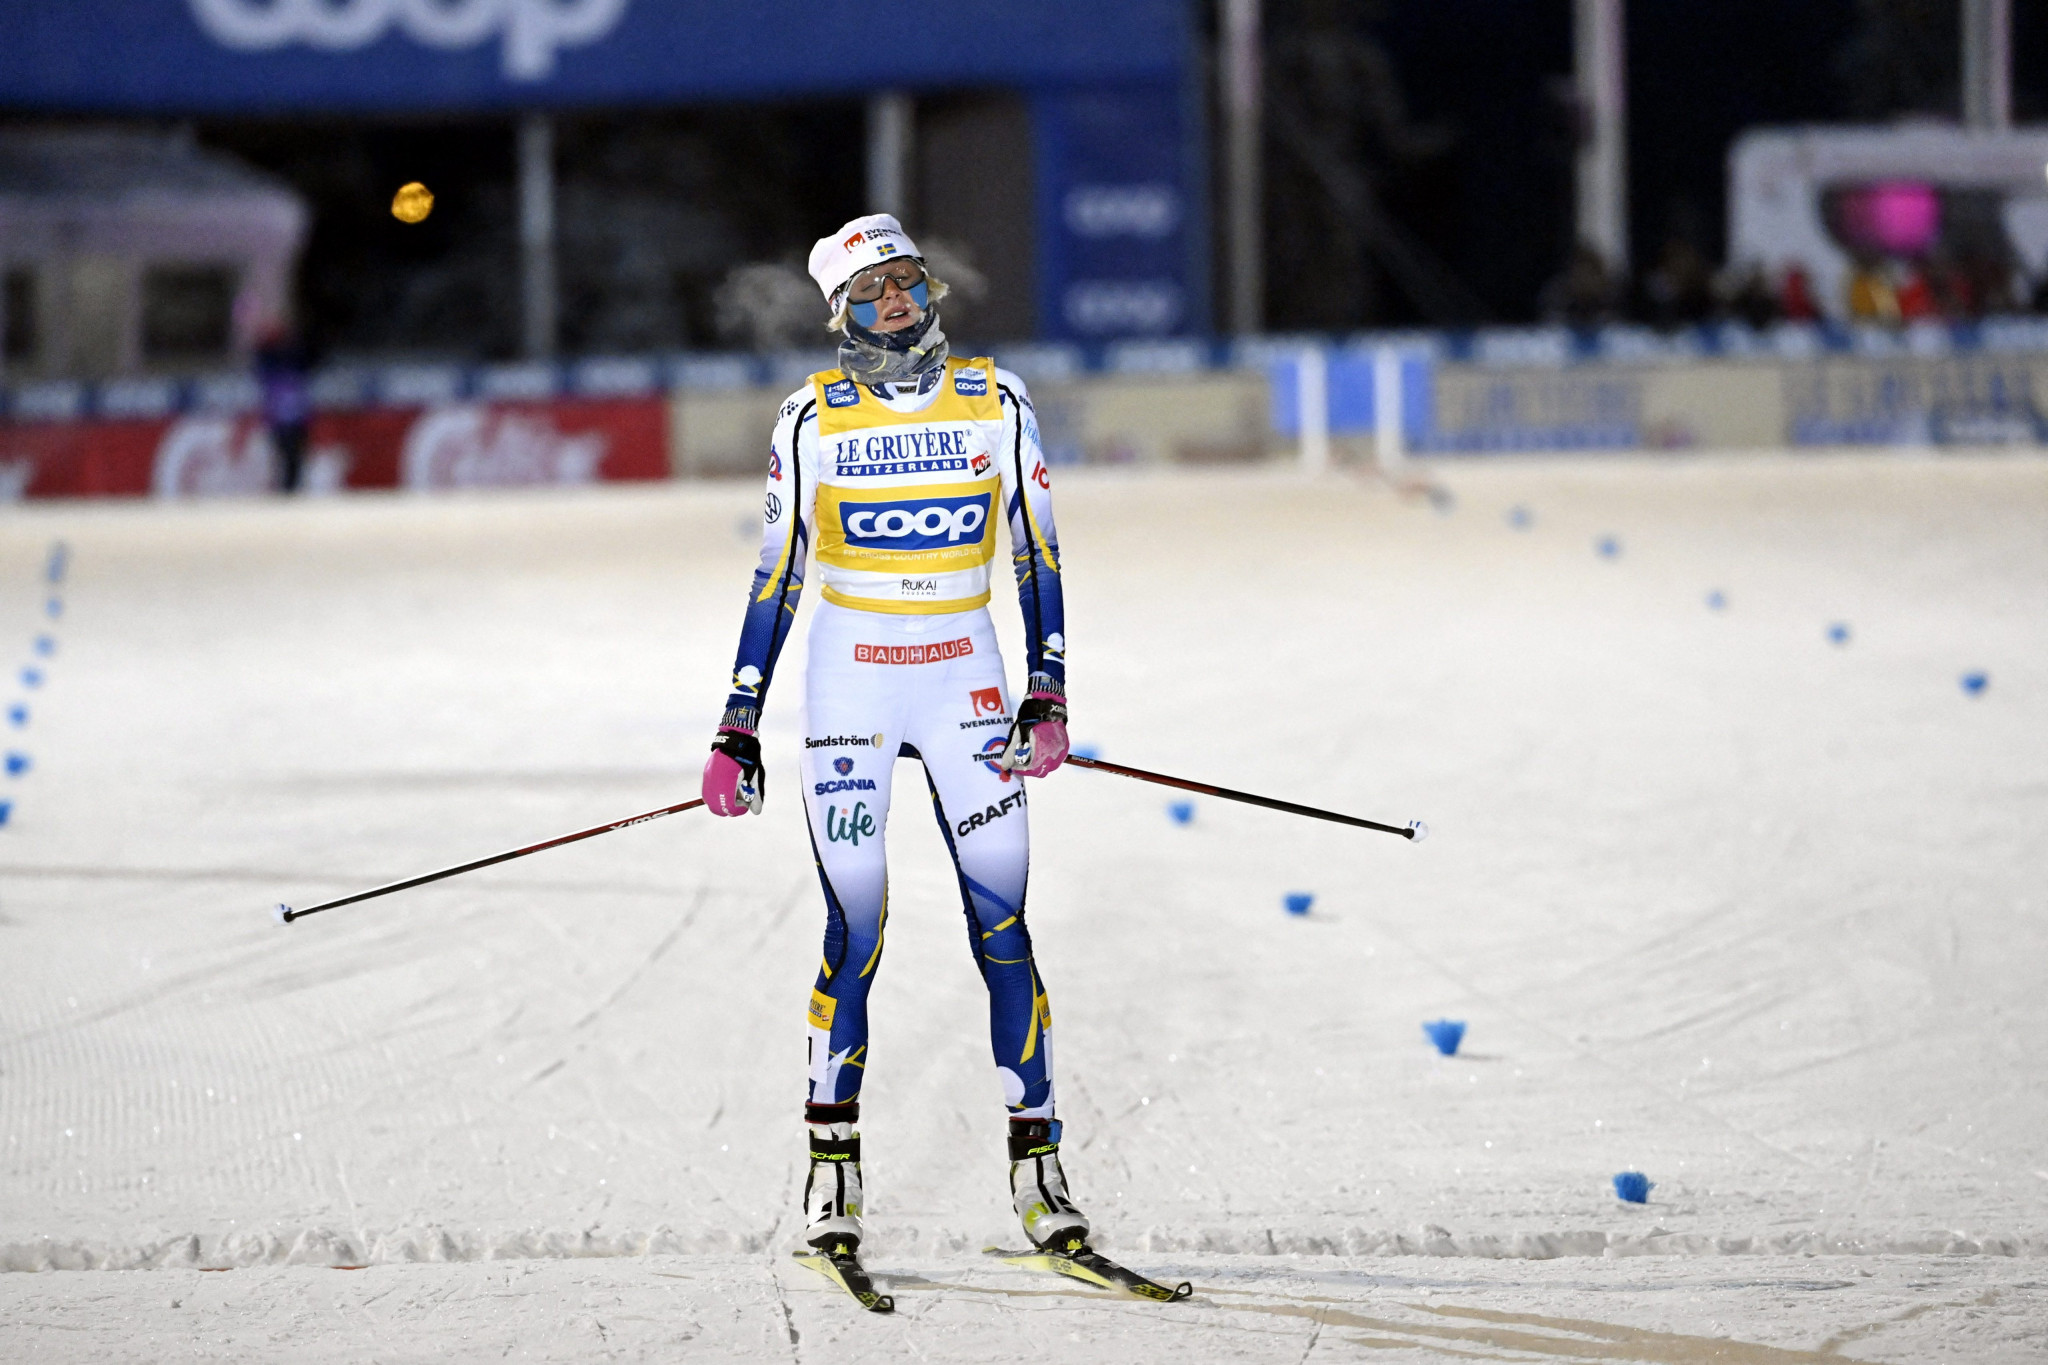 Lillehammer set to welcome back FIS Cross-Country World Cup